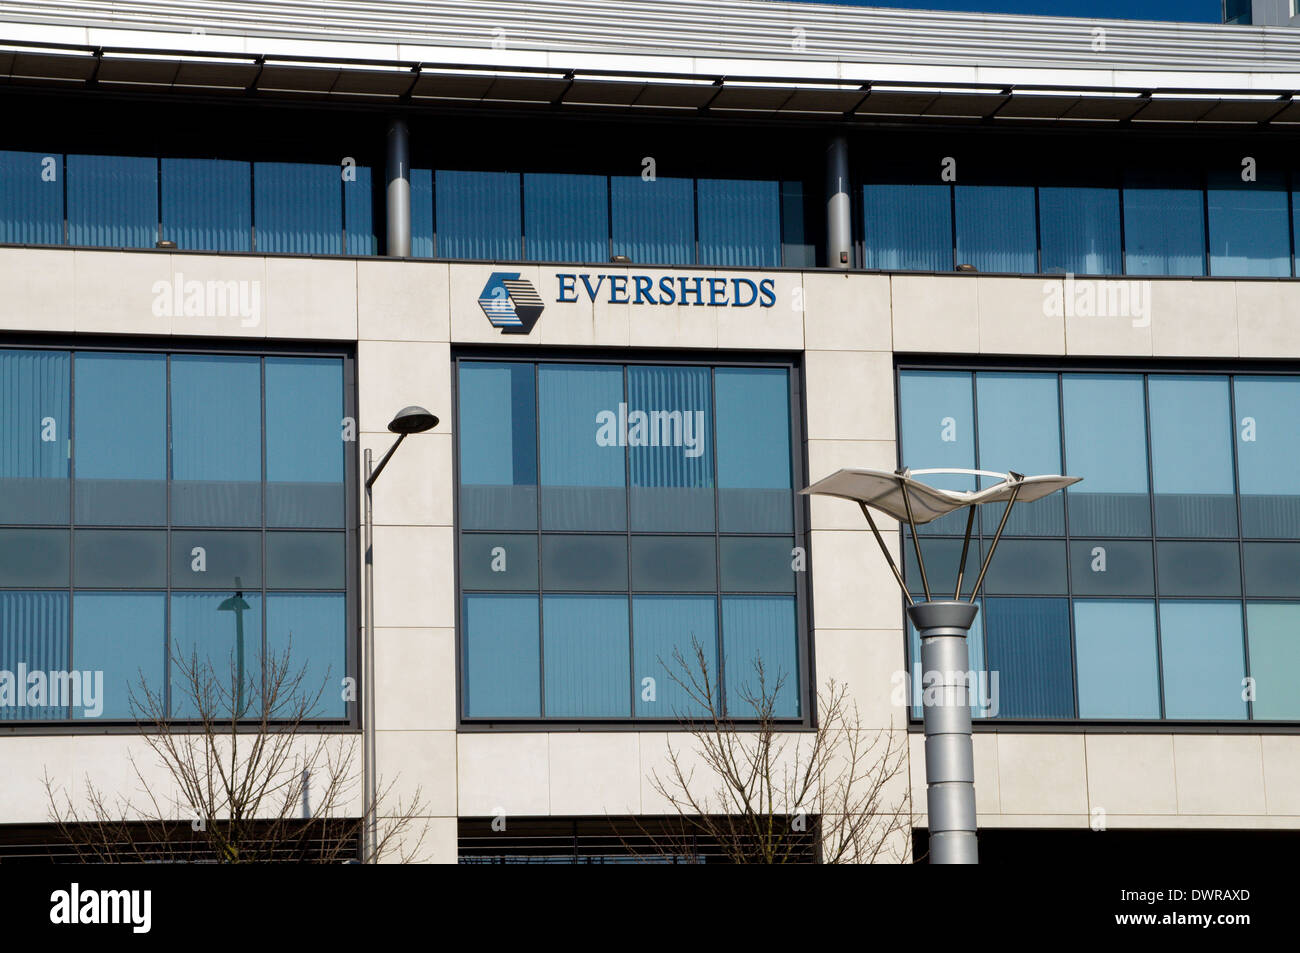 Eversheds Law Firm offices, Callaghan Square, Cardiff, Wales. Stock Photo